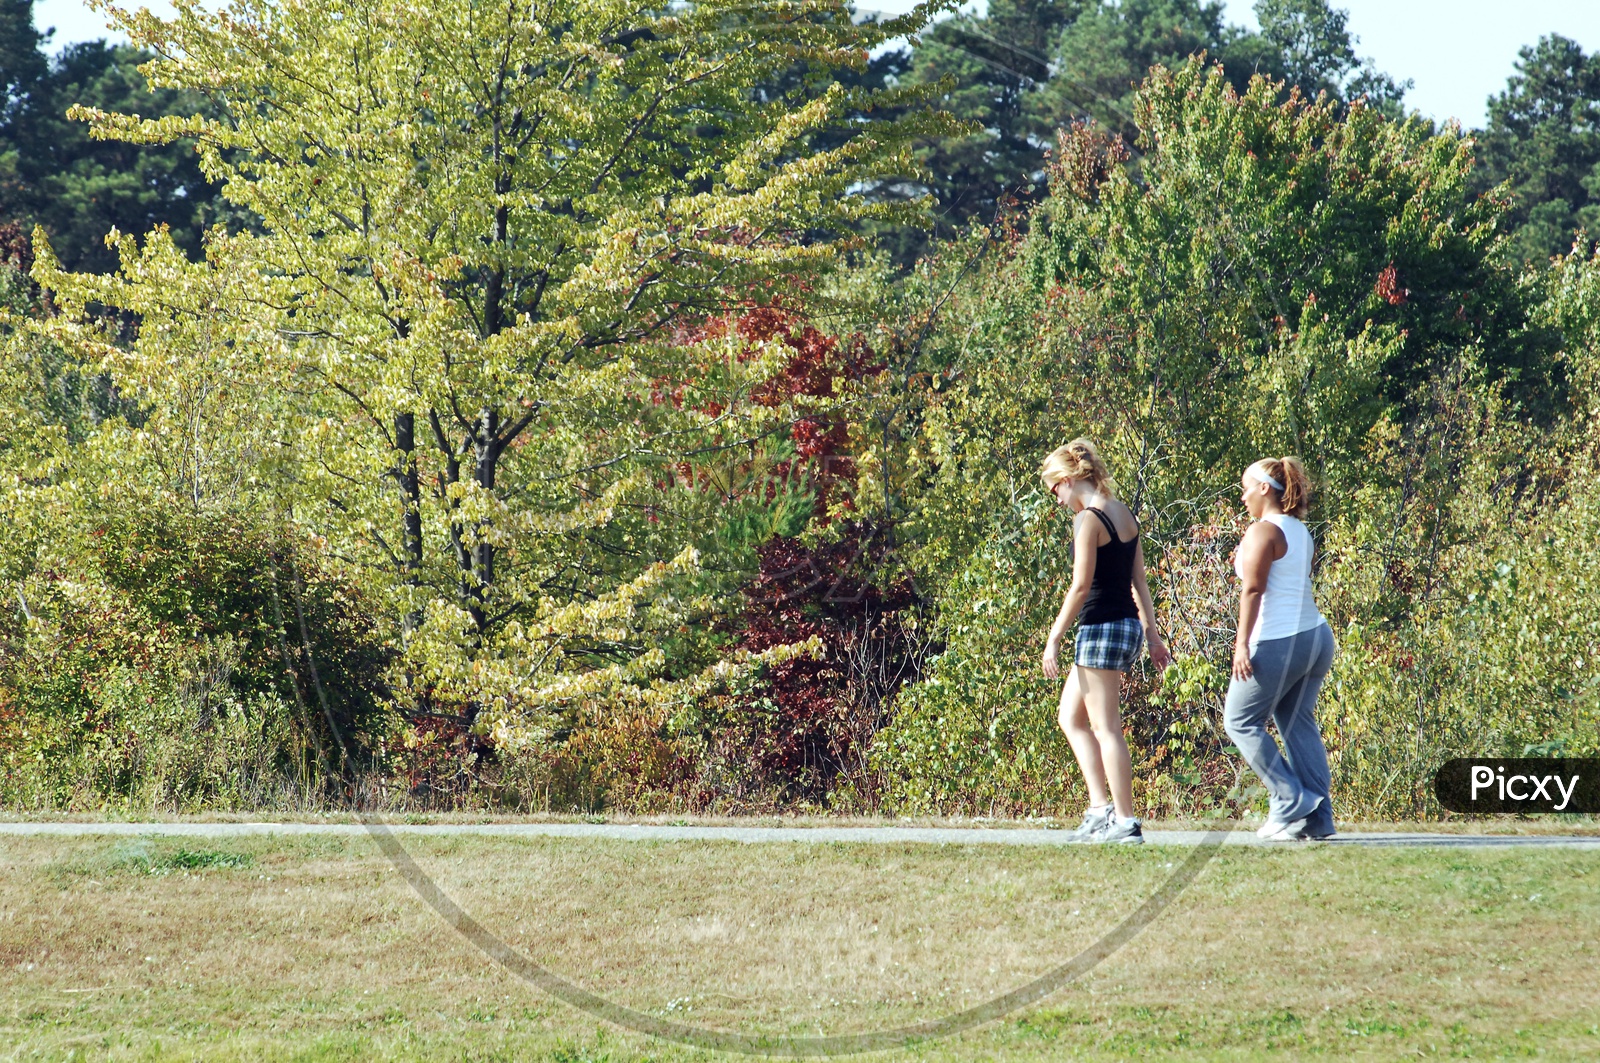 Women jogging in the park